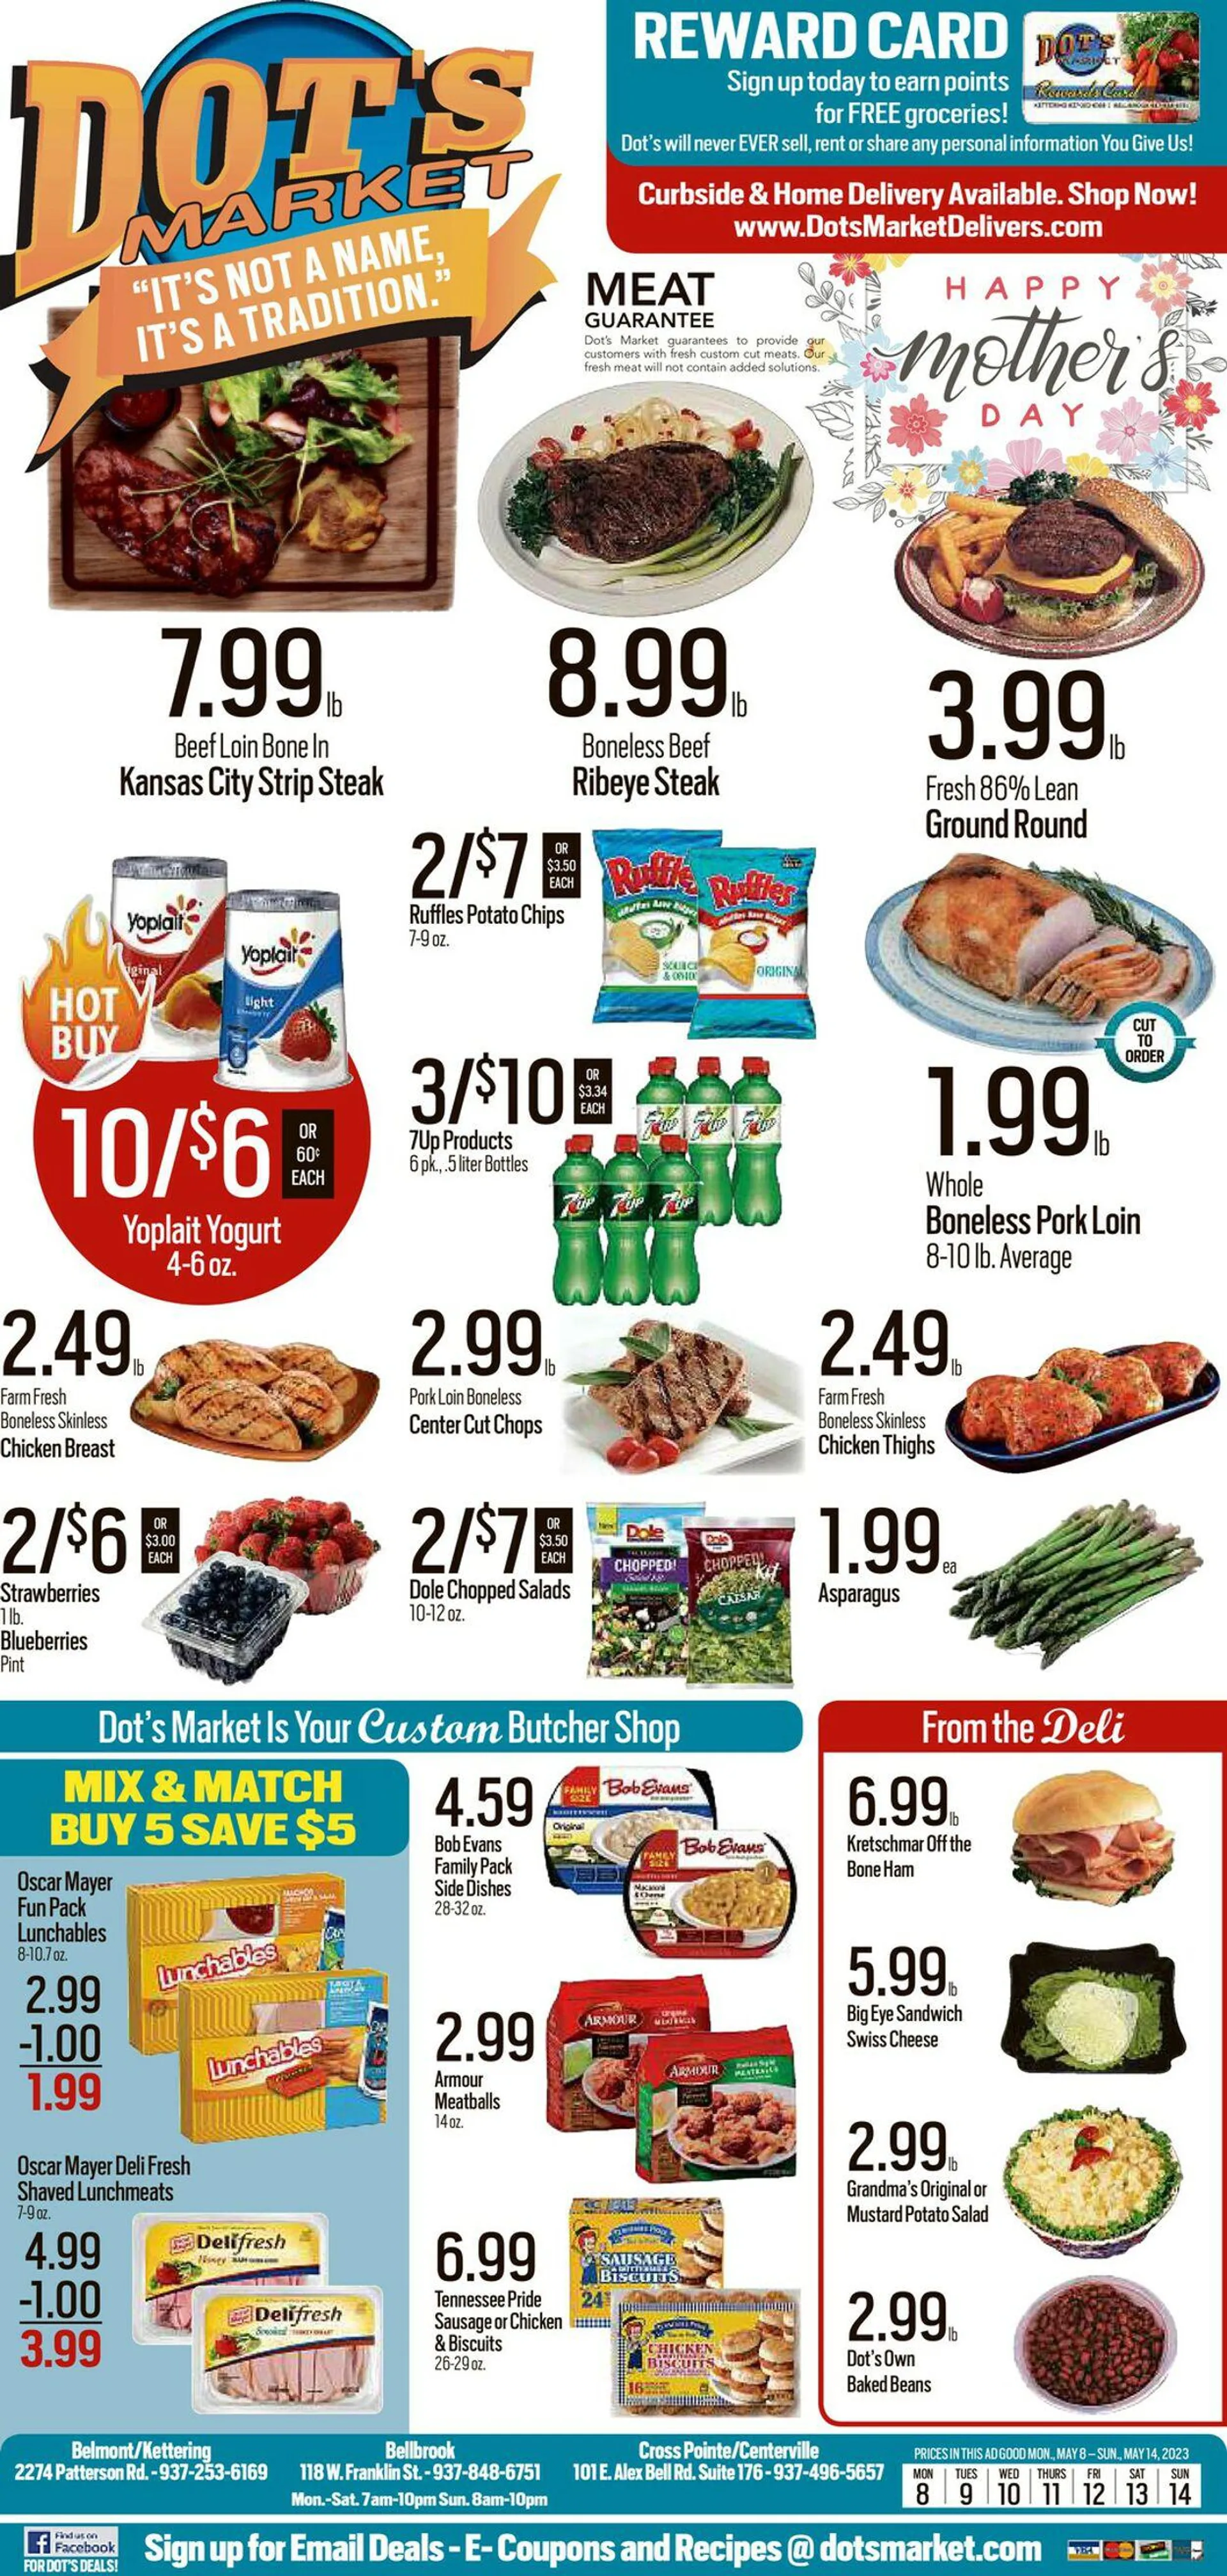 Dots Market Current weekly ad - 1